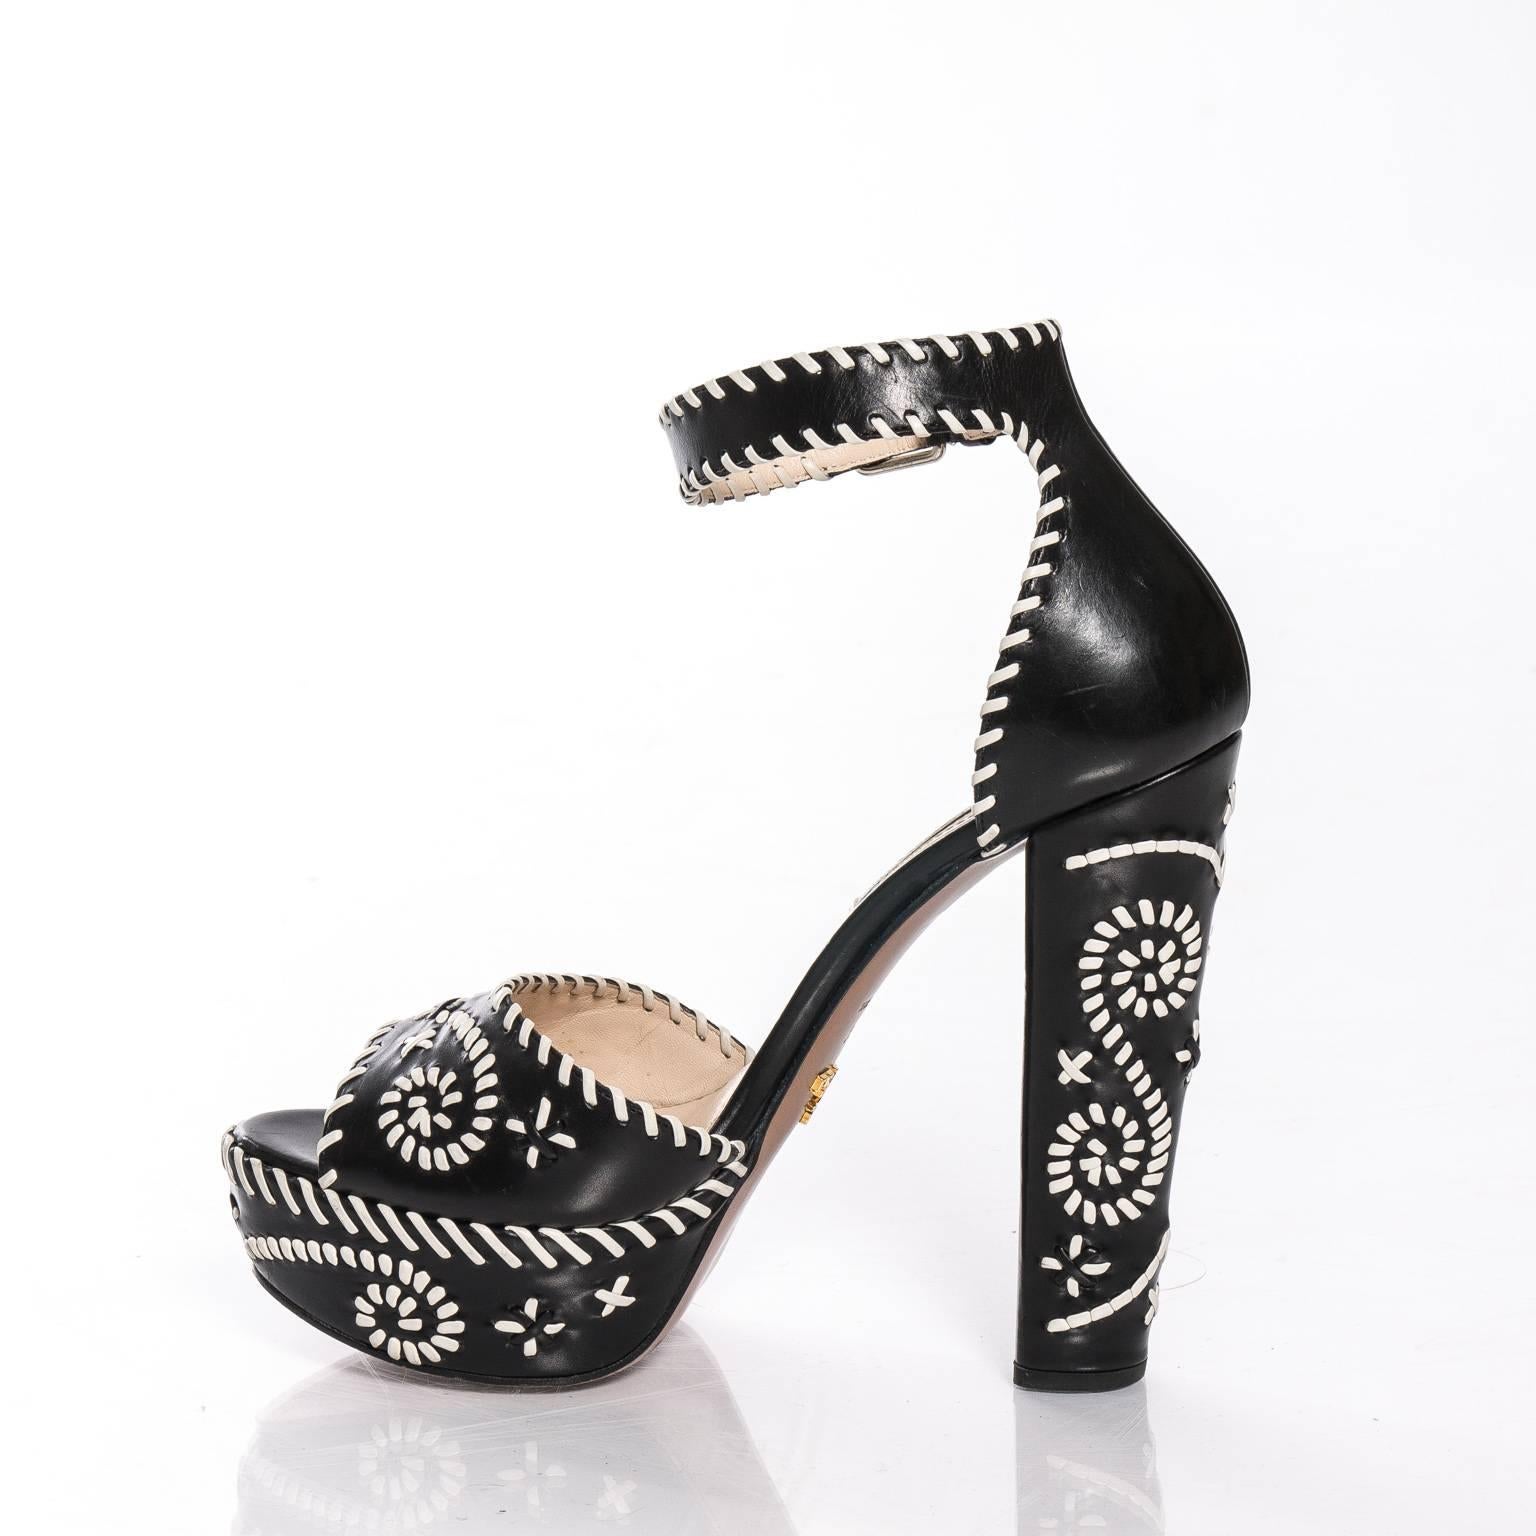 Pair of black and white whipstitch leather platform sandals by Prada. Peep toe and adjustable ankle strap. Made in Italy. Size 39.5. Lightly used.
